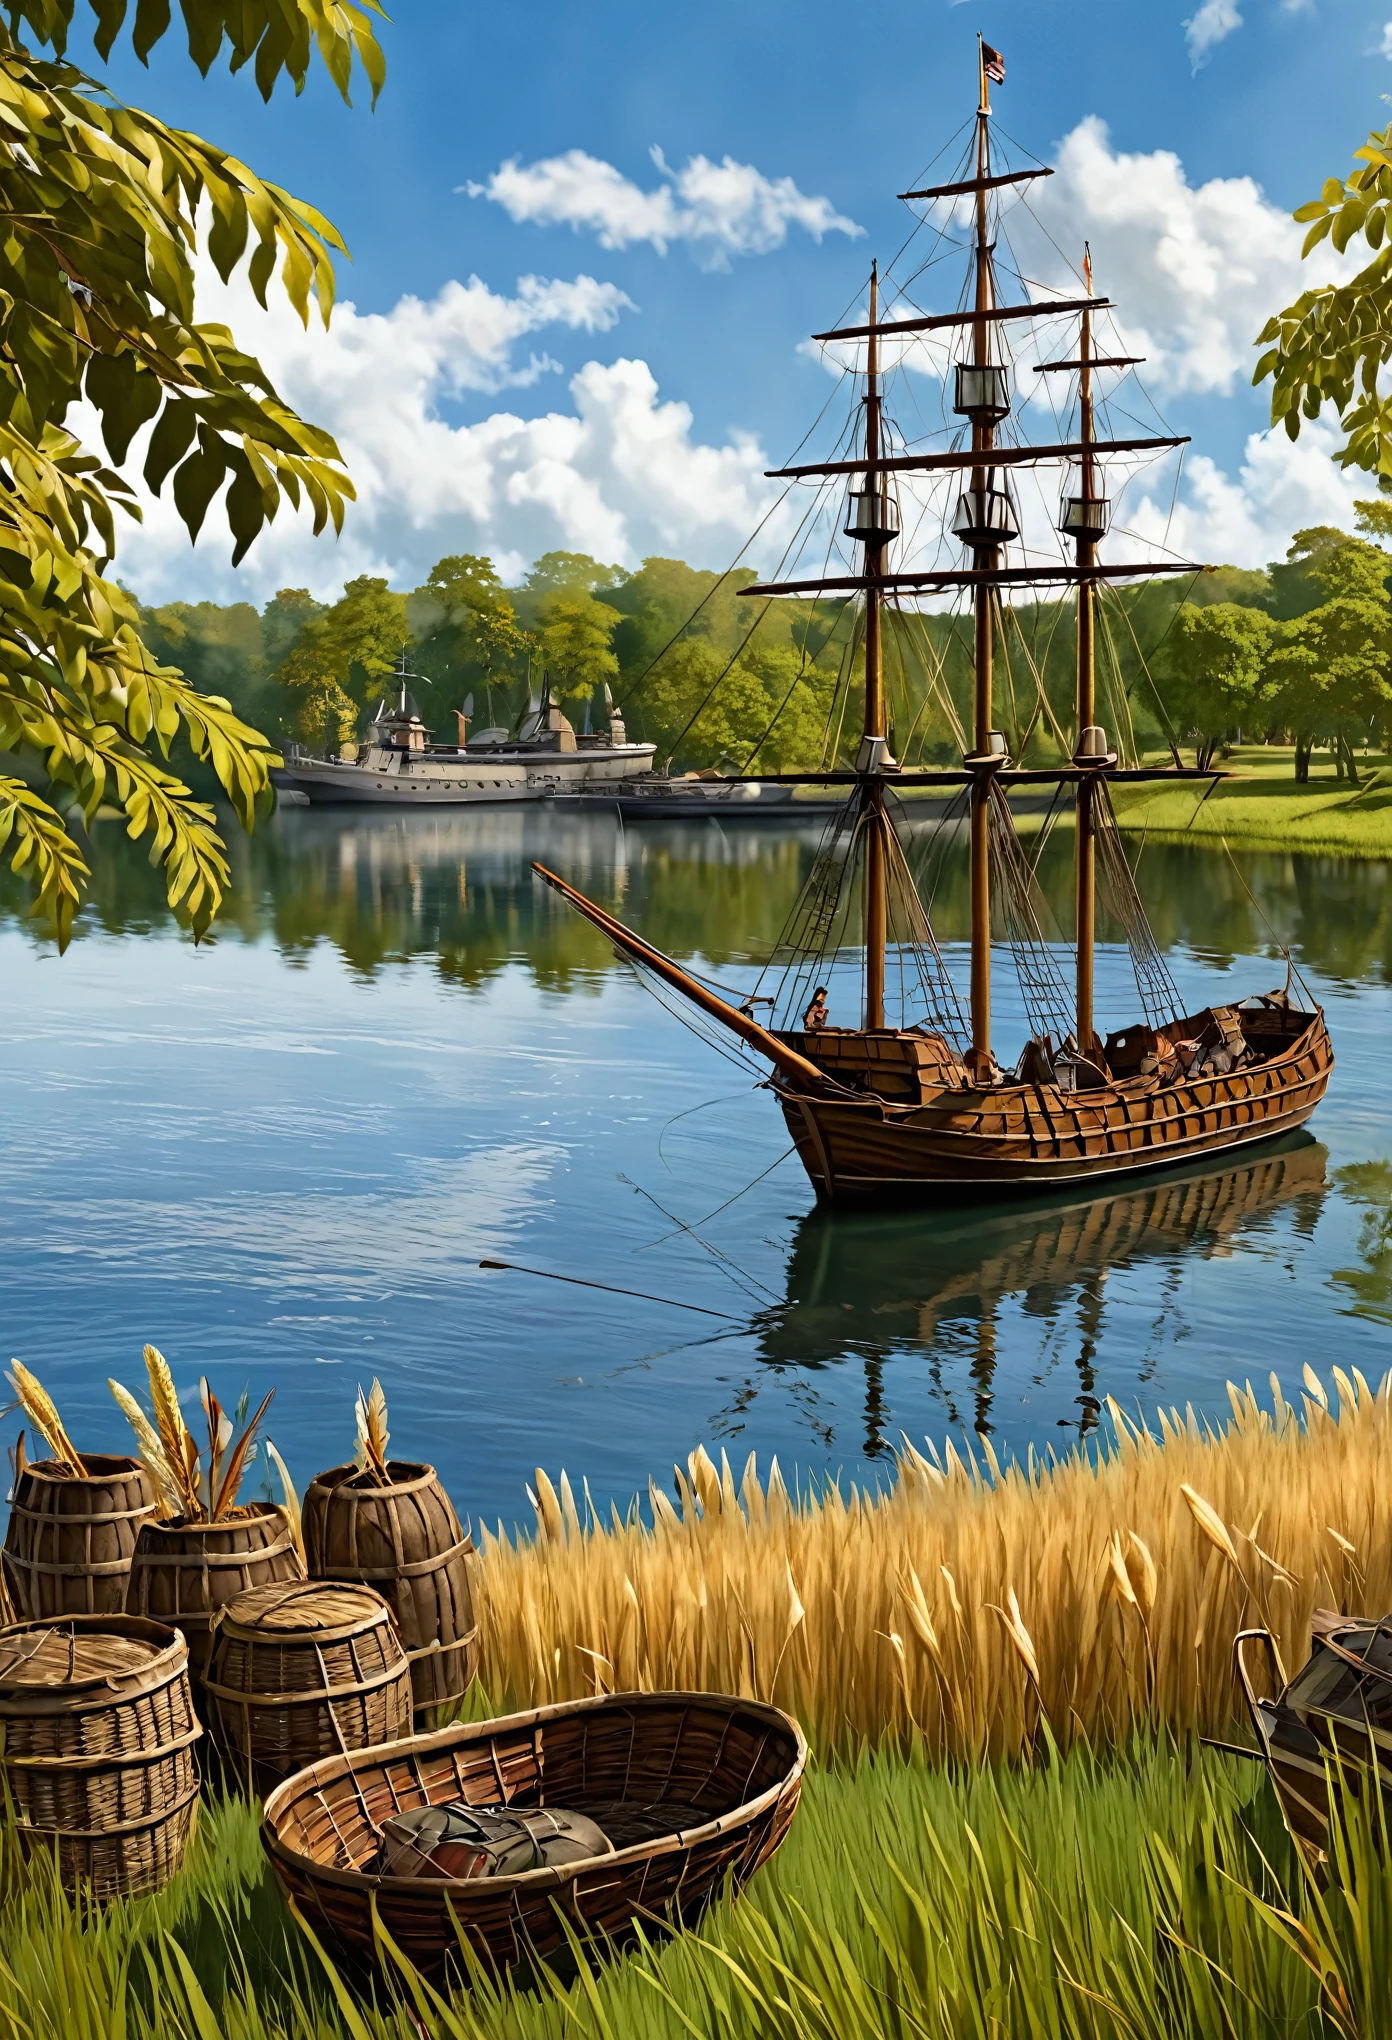 "Create a digital artwork depicting an early colonial trade scene between European settlers and Native Americans. Include European settlers dressed in 17th-century attire, some holding muskets and wearing wide-brimmed hats and cloaks. The Native Americans should be dressed in traditional attire with feathered headdresses and carrying goods like baskets of corn. The setting should be near a waterfront with a docked ship in the background and a blend of natural elements such as grass and trees."